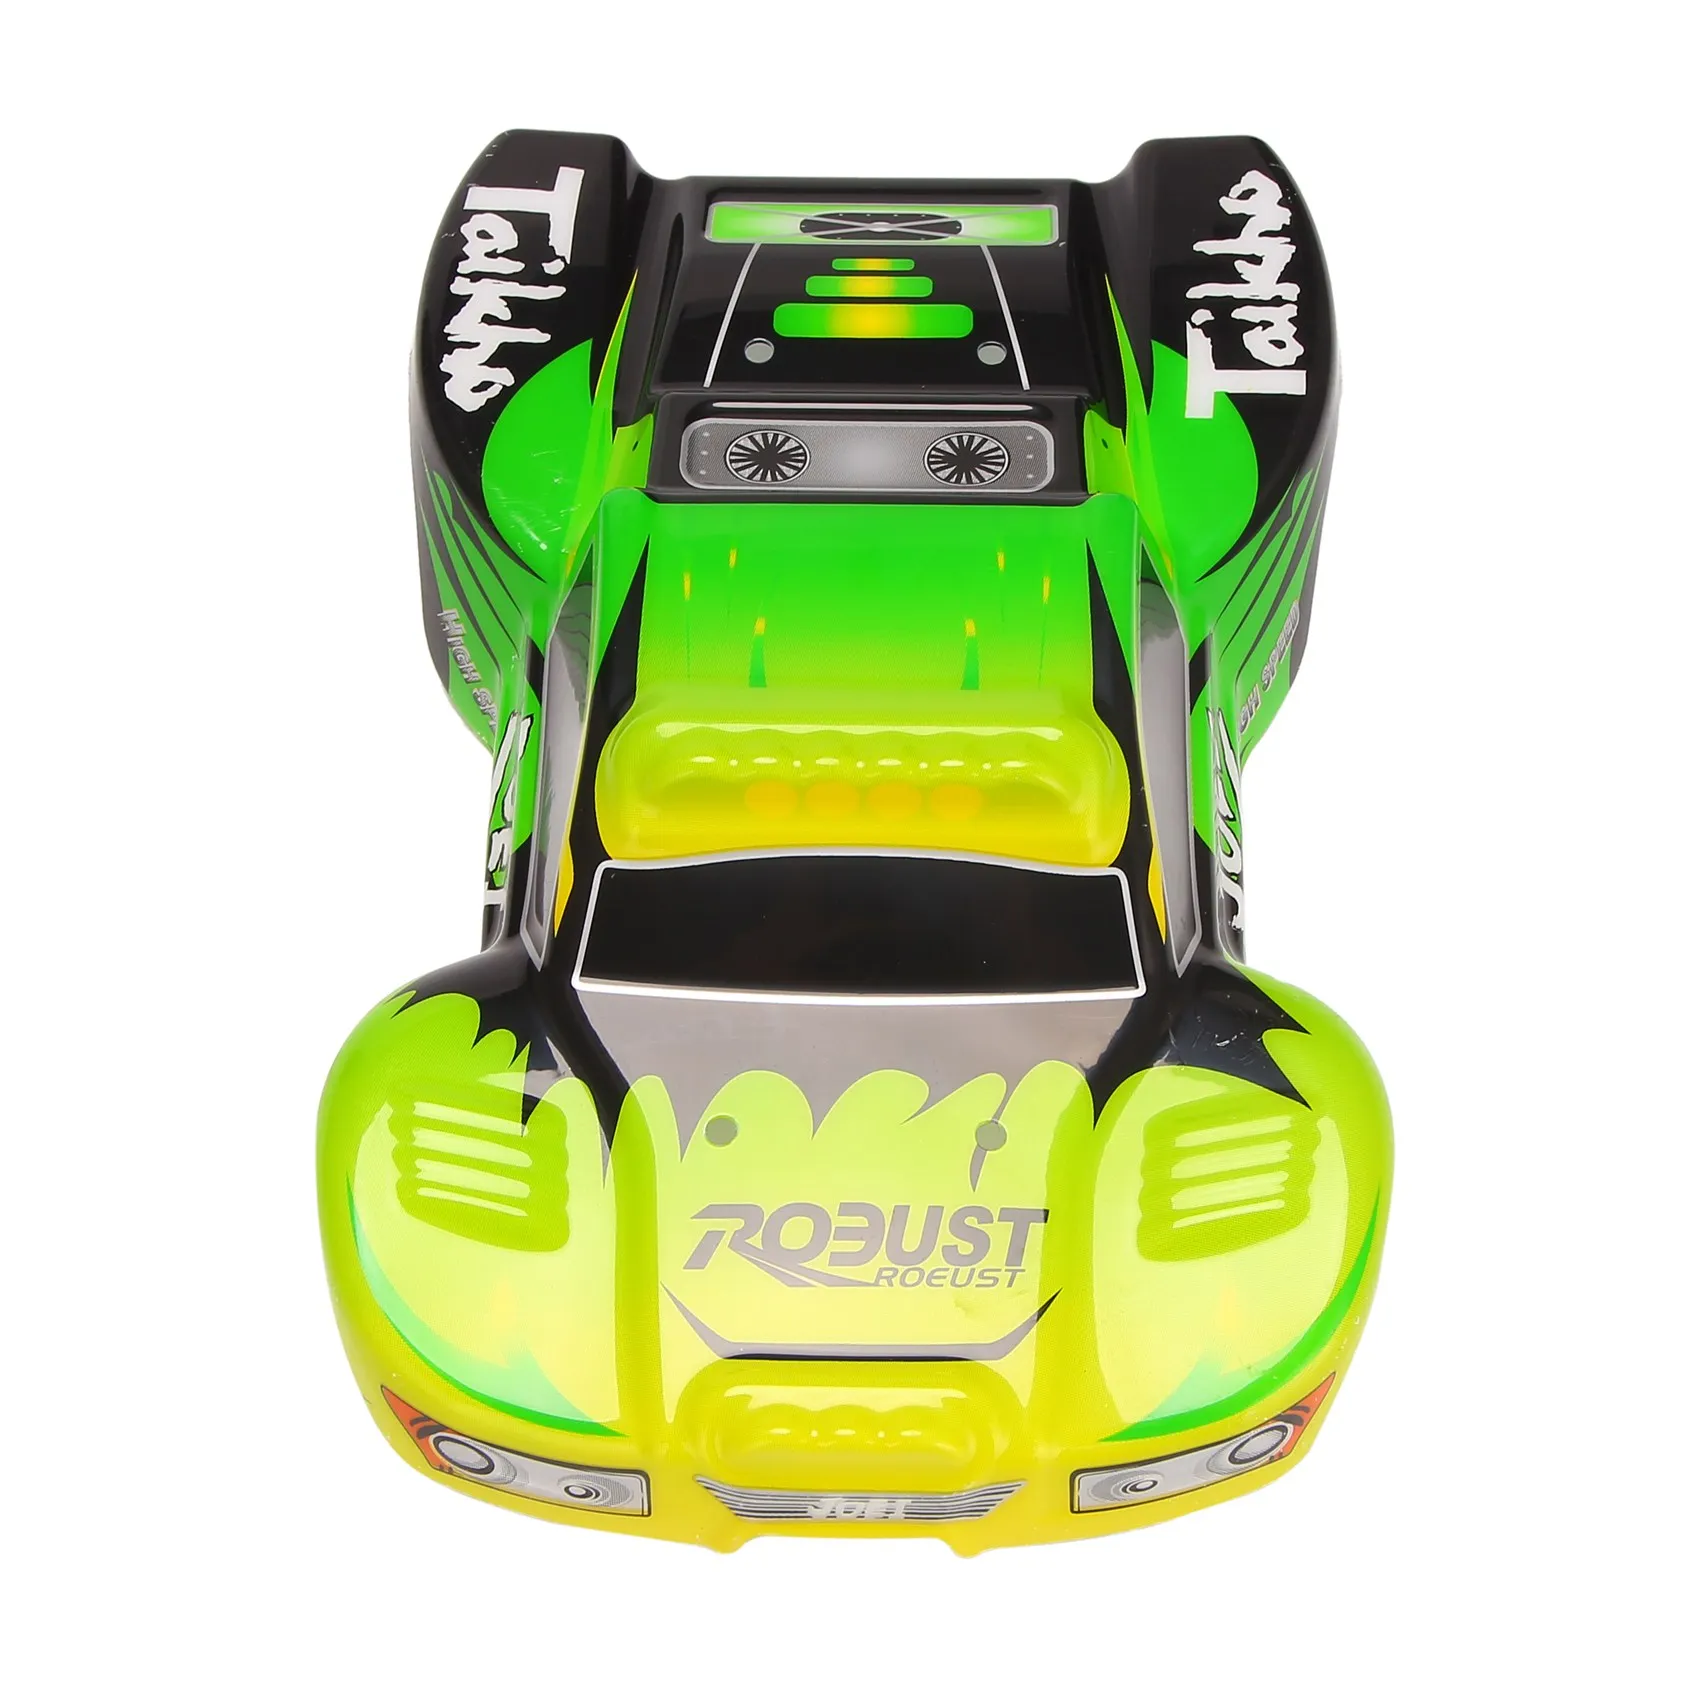 

A969-06 A969-07 RC Car Body Shell Covers for 1/18 Wltoys A969 Rc Car Spare Parts Accessories Green